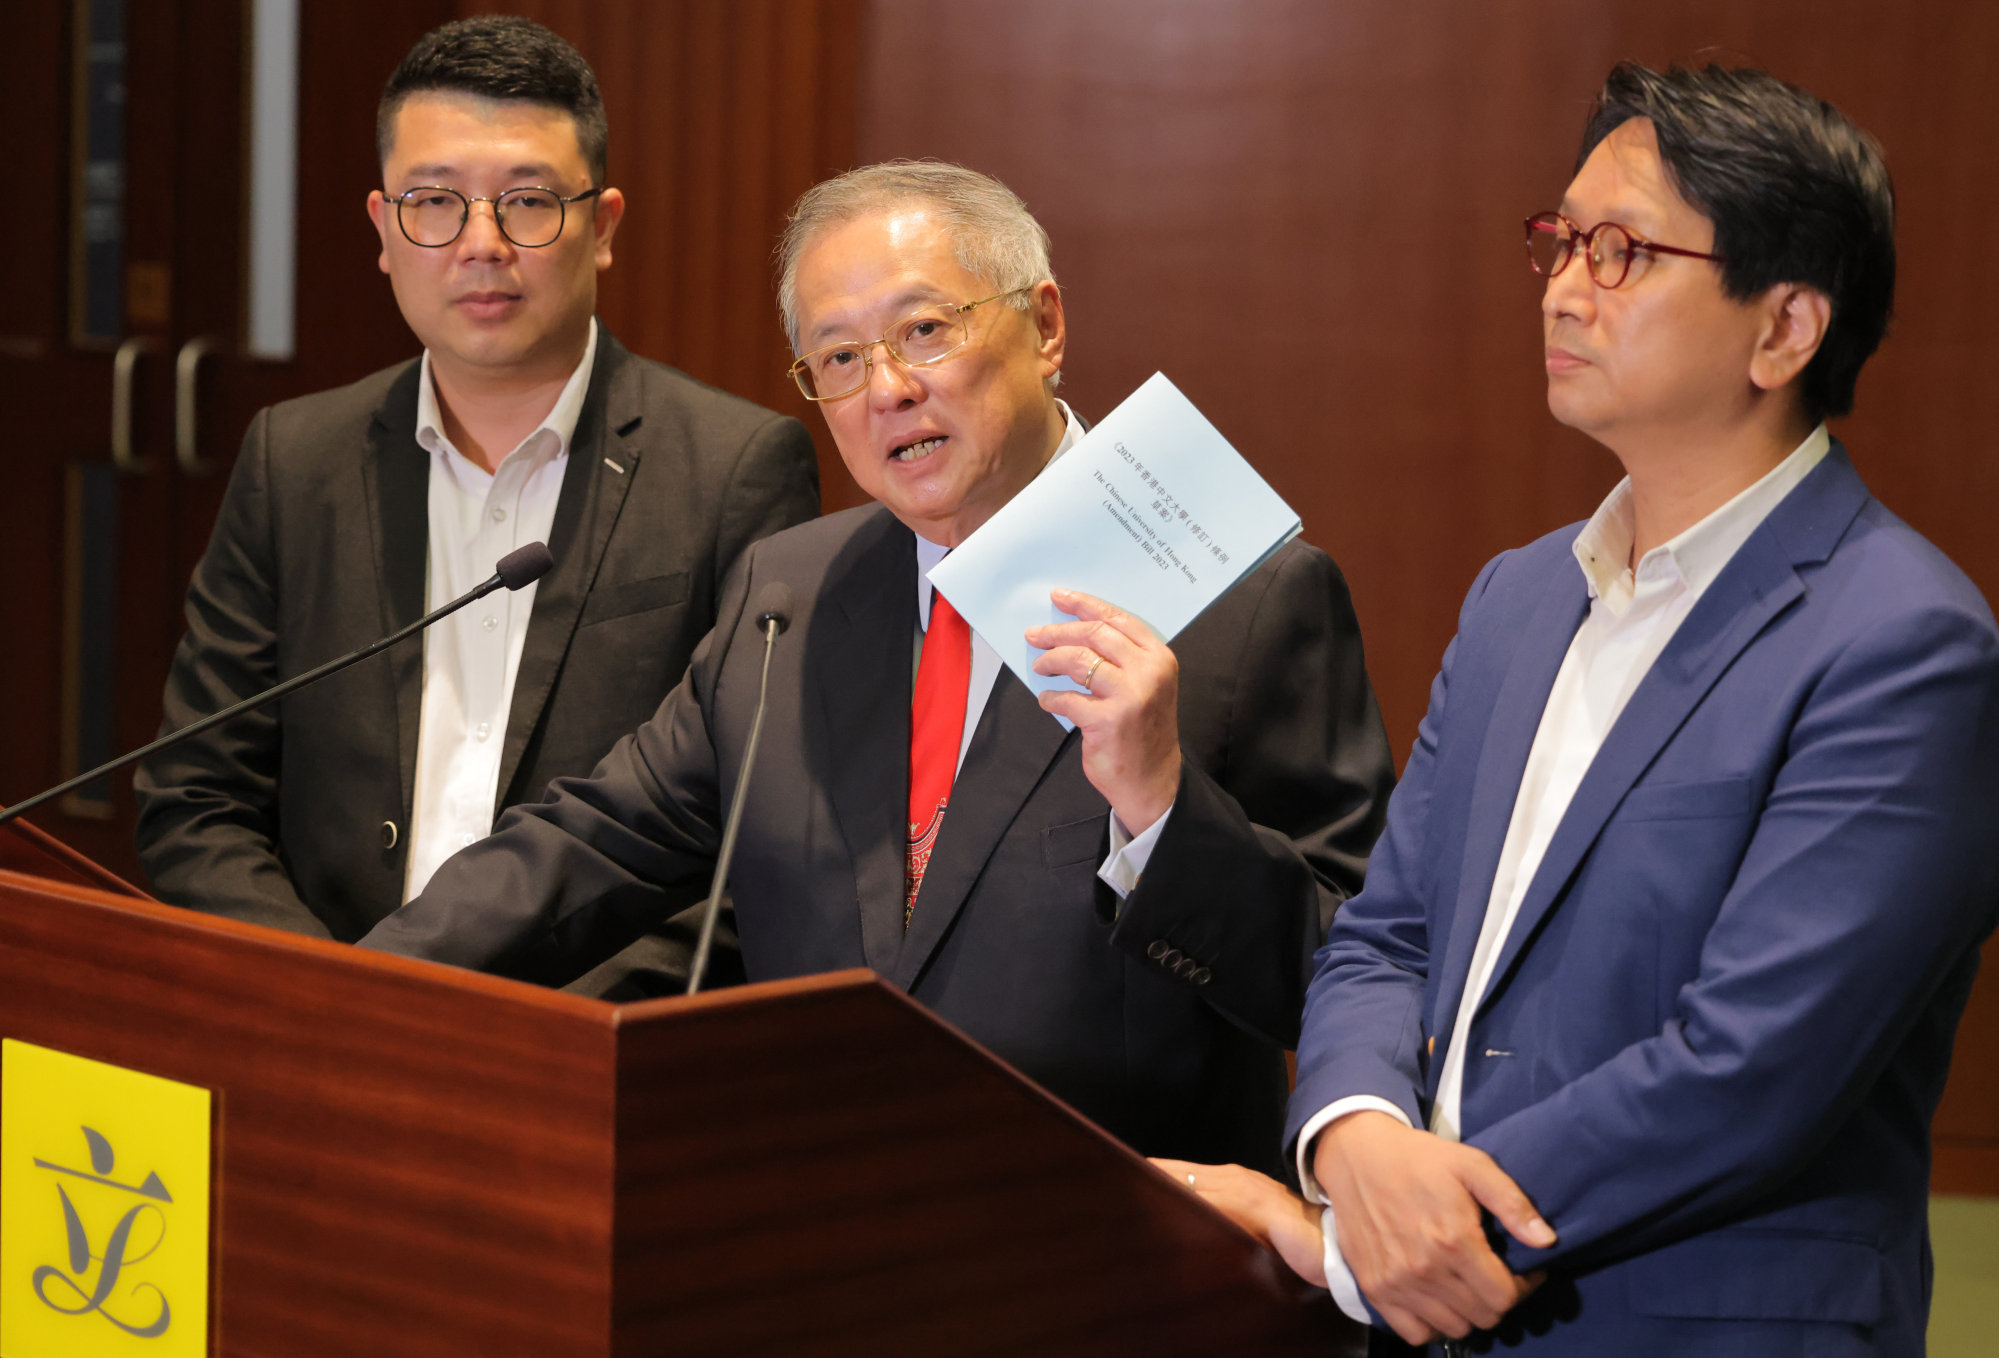 (From left) Lawmakers Edward Lau, Tommy Cheung and Bill Tang, who initiated the private members’ bill to reform the CUHK council. Photo: Jelly Tse